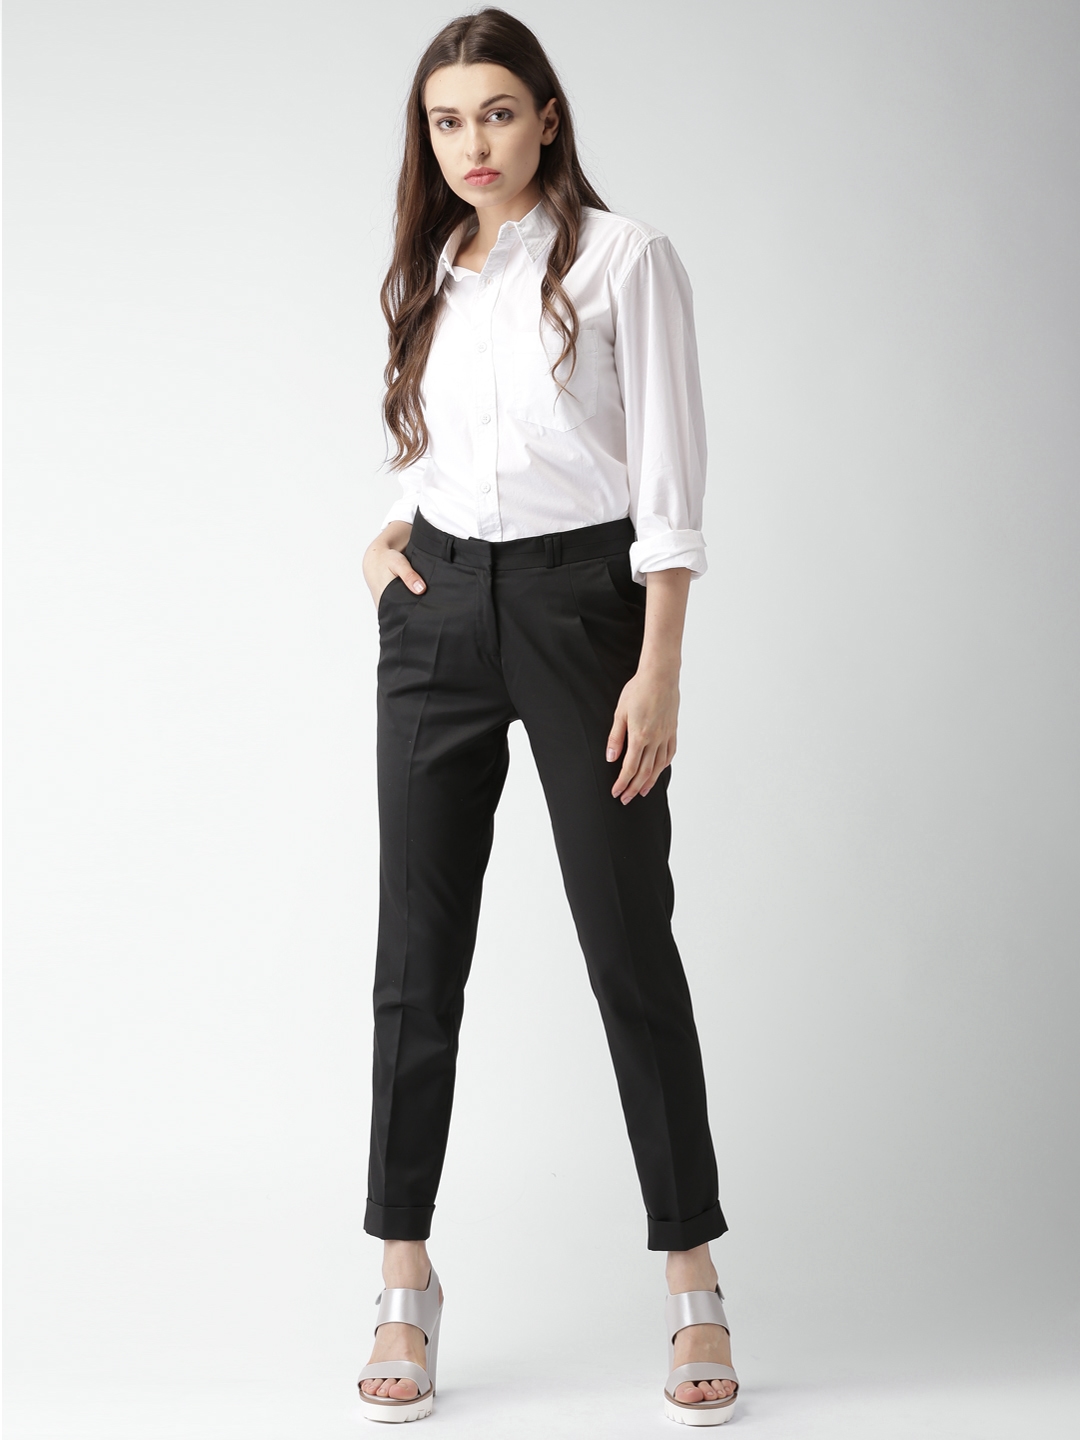 Details more than 145 formal trousers for women